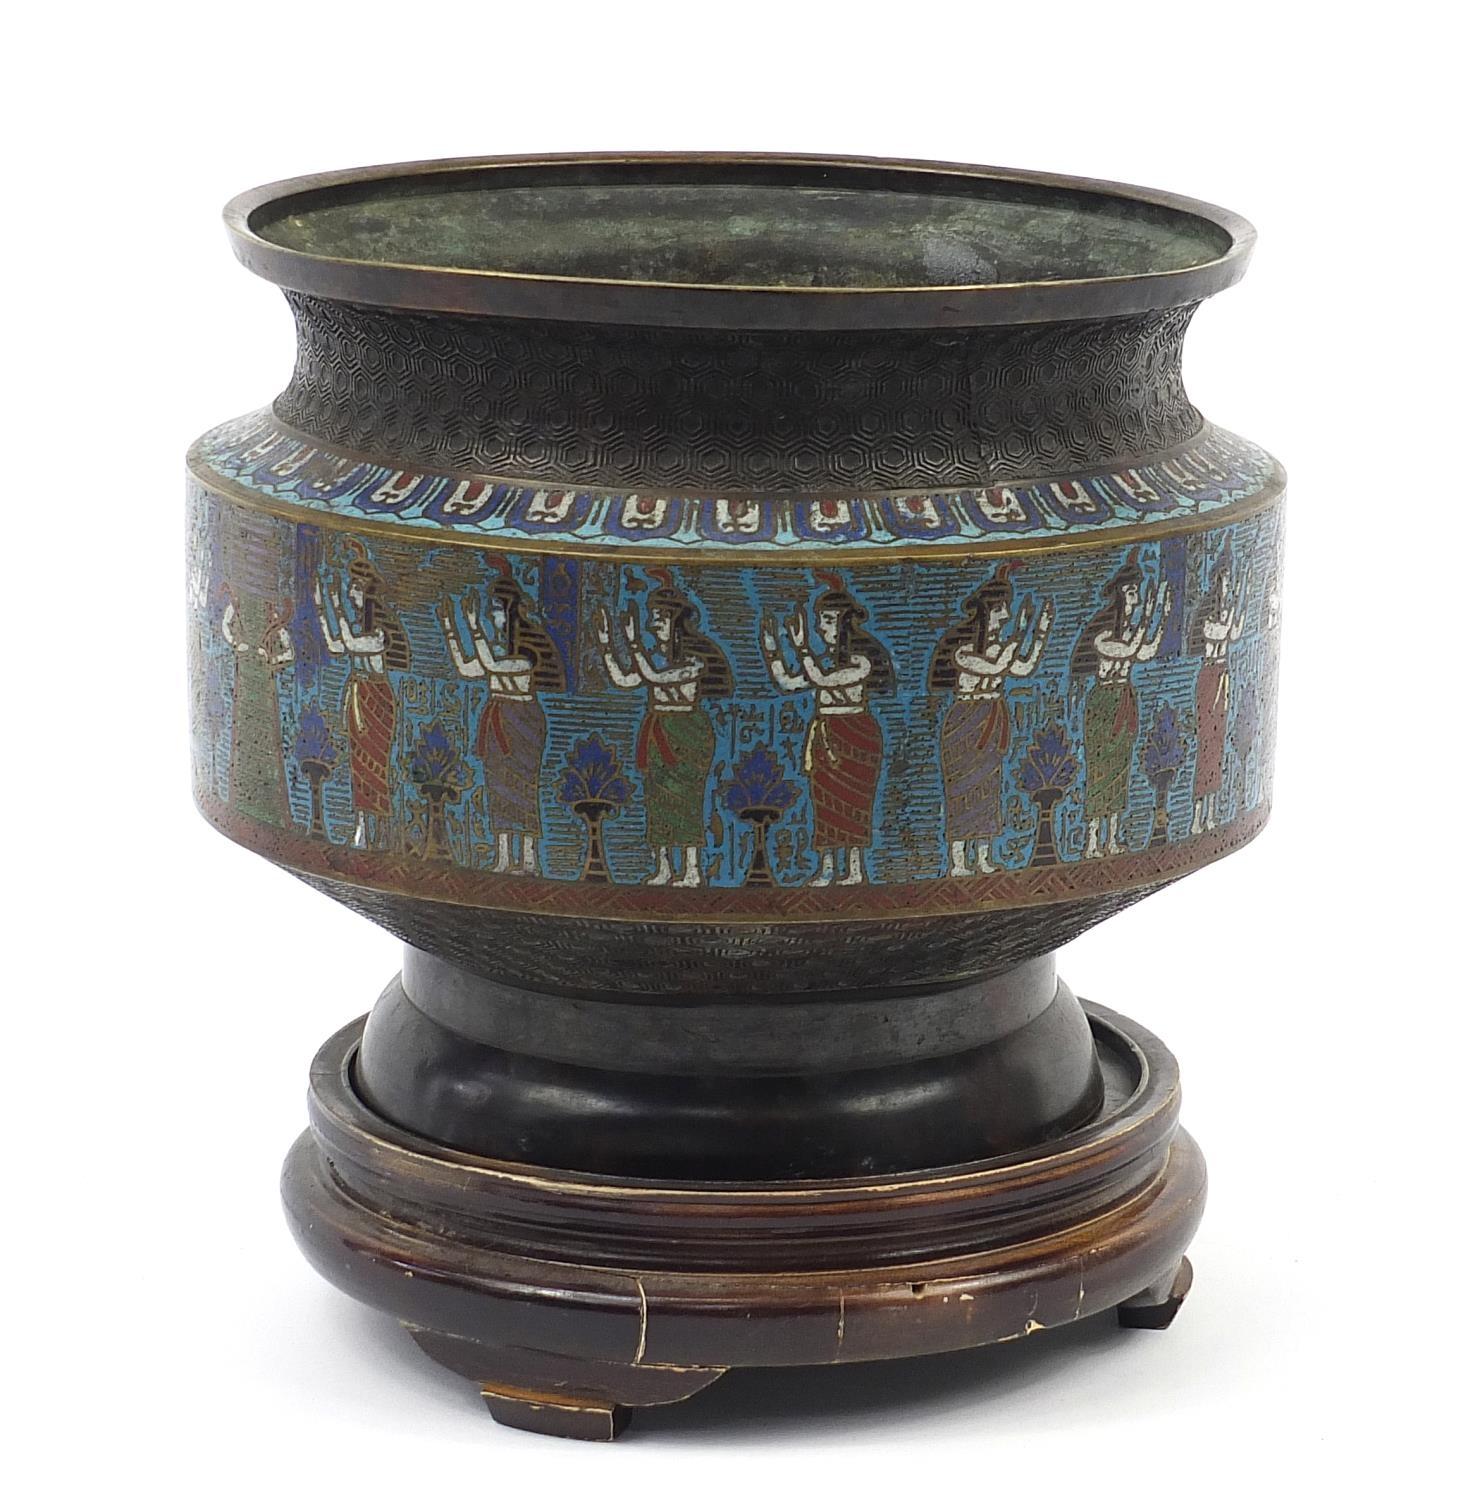 Large Chinese Egyptian revival cloisonné planter on carved hardwood stand, overall 30.5cm high x - Image 2 of 8